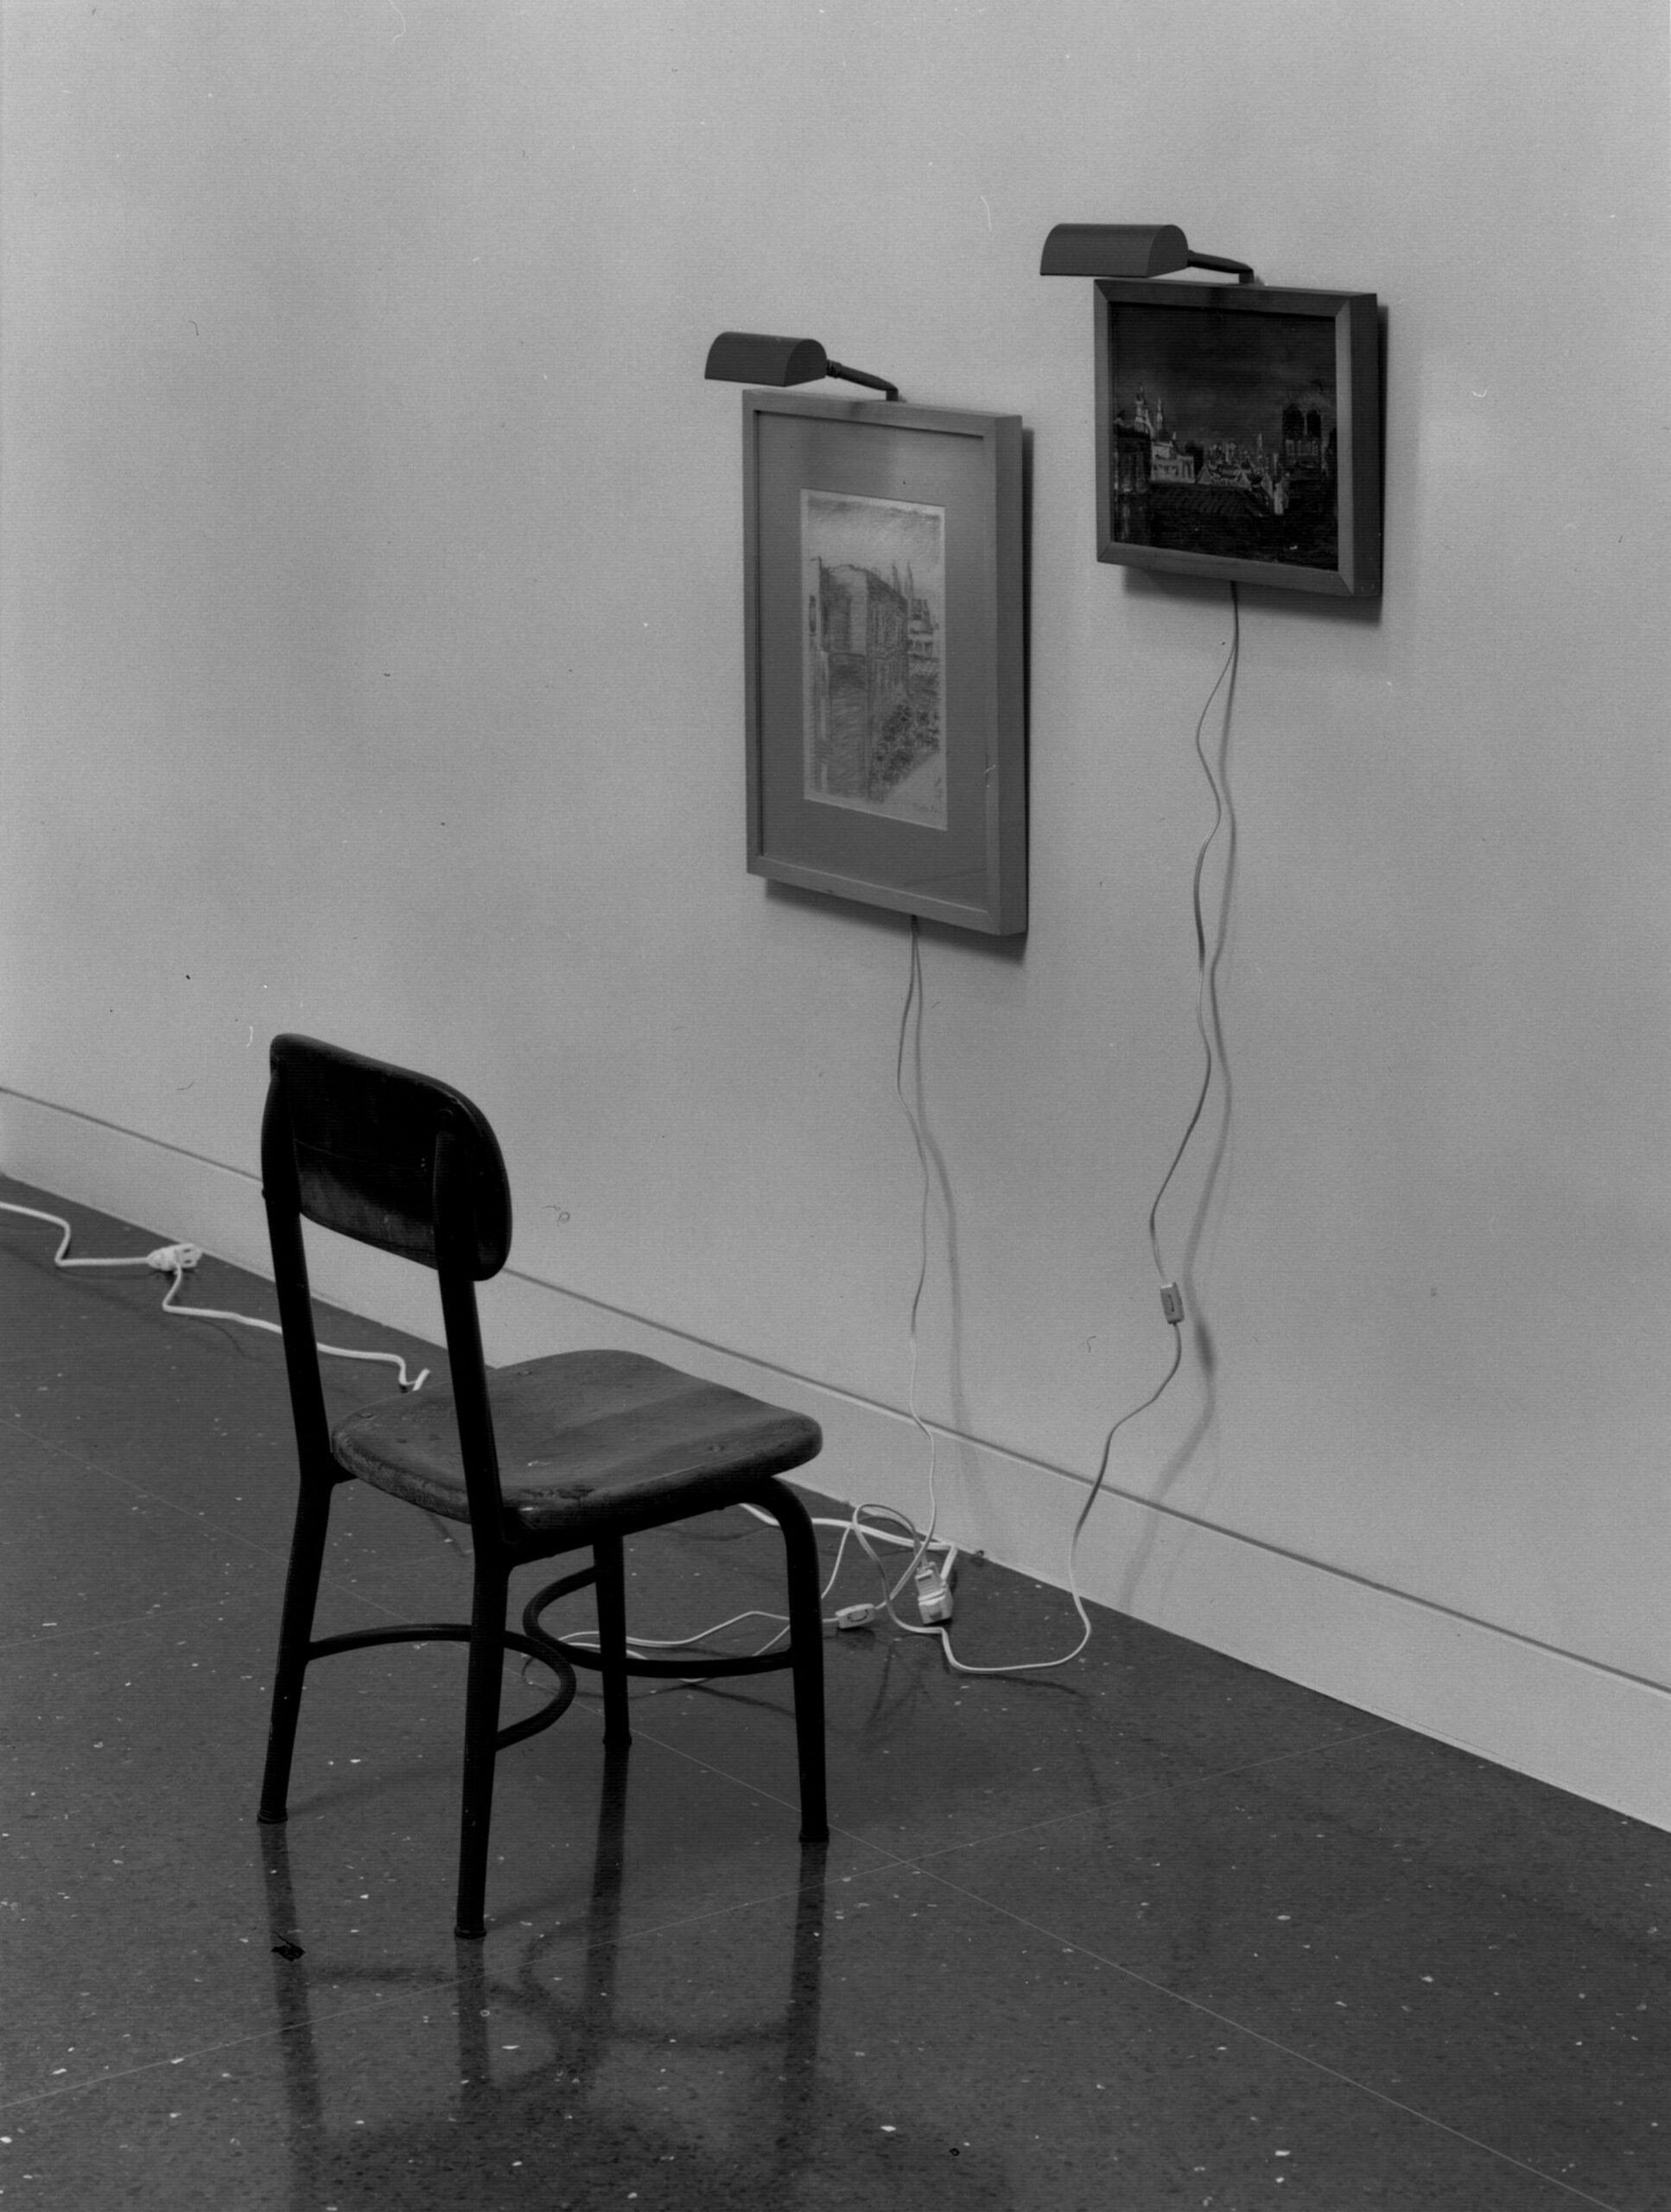 A white gallery wall on which two small framed images are installed with study lights right above them. Power chords run from the bottom of each piece, and a small black chair is placed in front of the images.